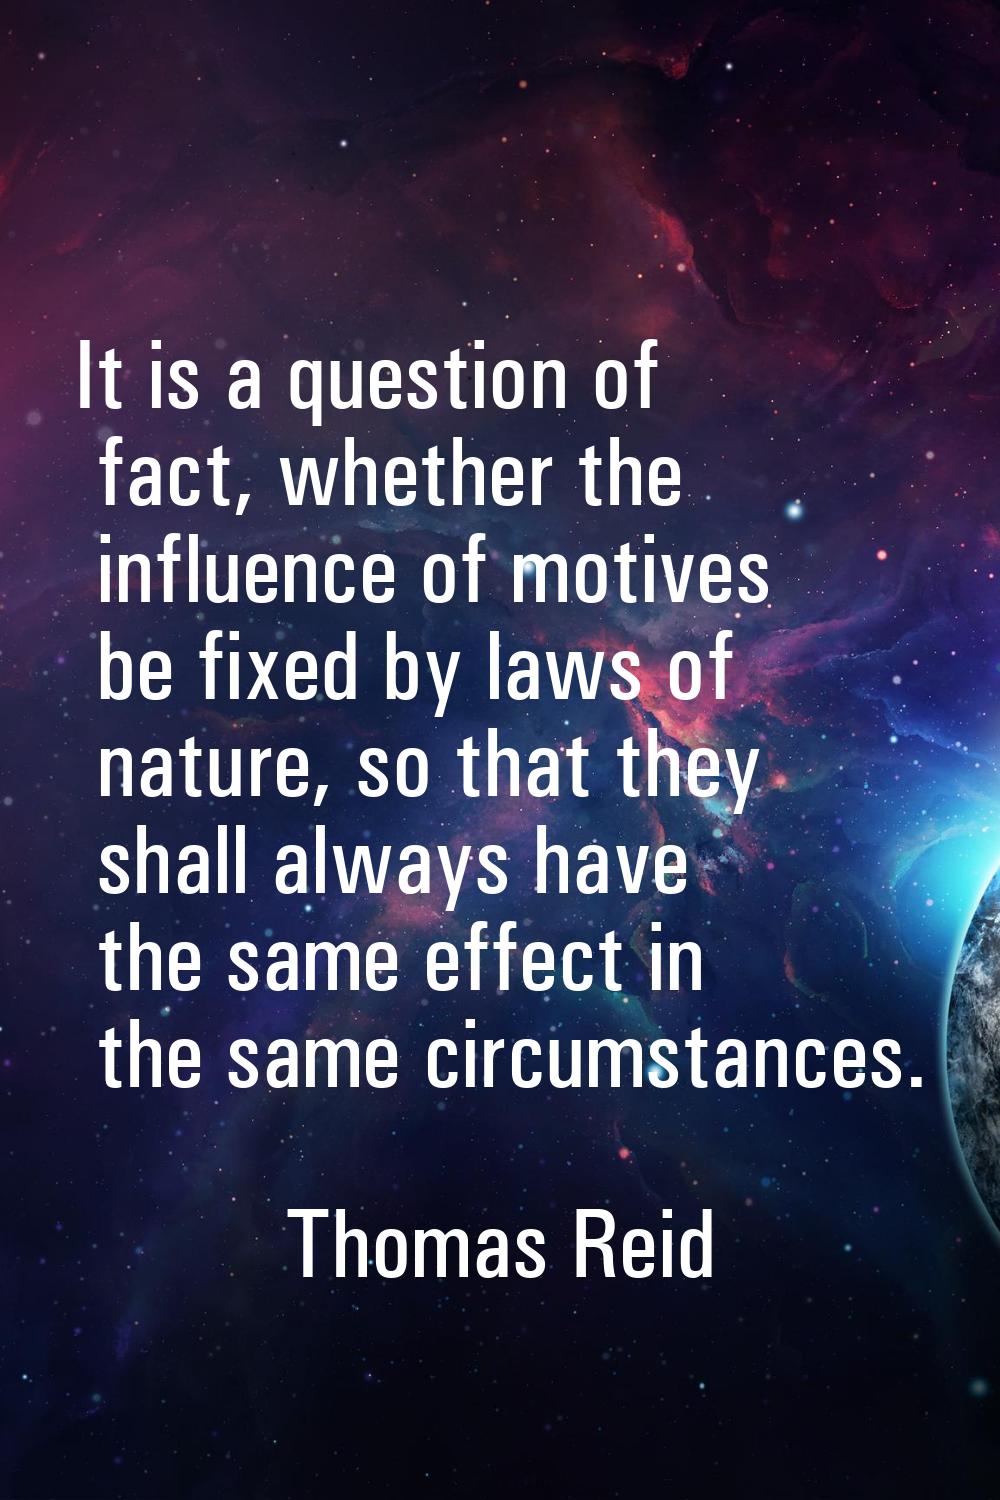 It is a question of fact, whether the influence of motives be fixed by laws of nature, so that they